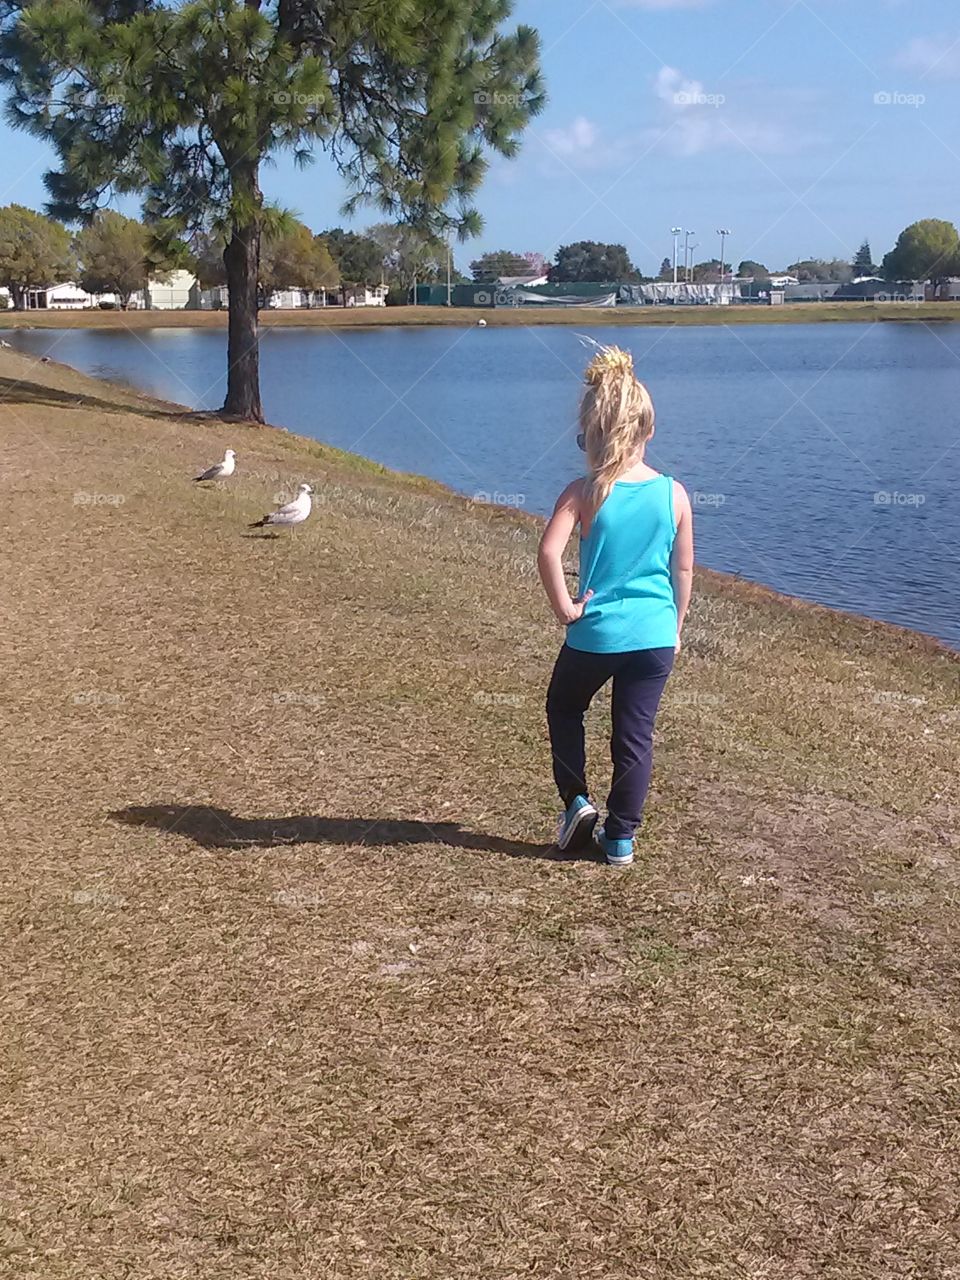 freeze tag with seagulls . my niece is playing tag with seagulls 